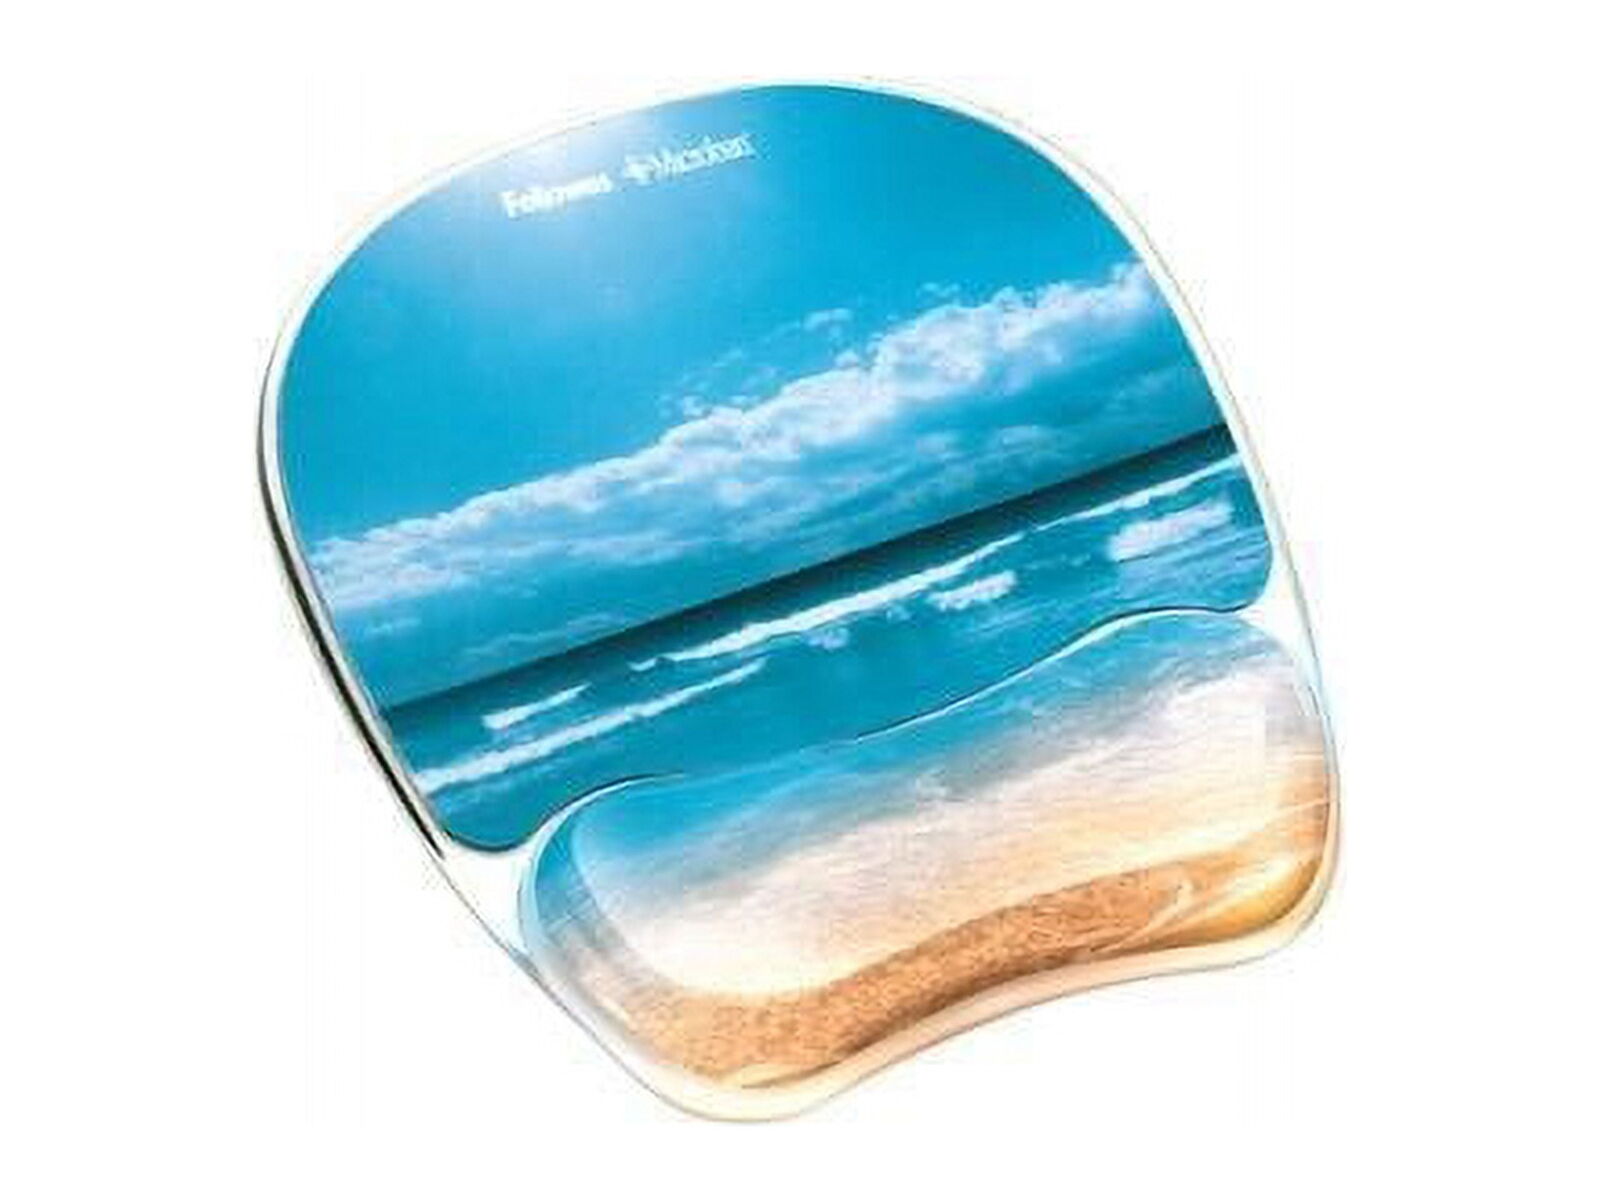 Fellowes Photo Gel Mouse Pad Wrist Rest with Microban Protection